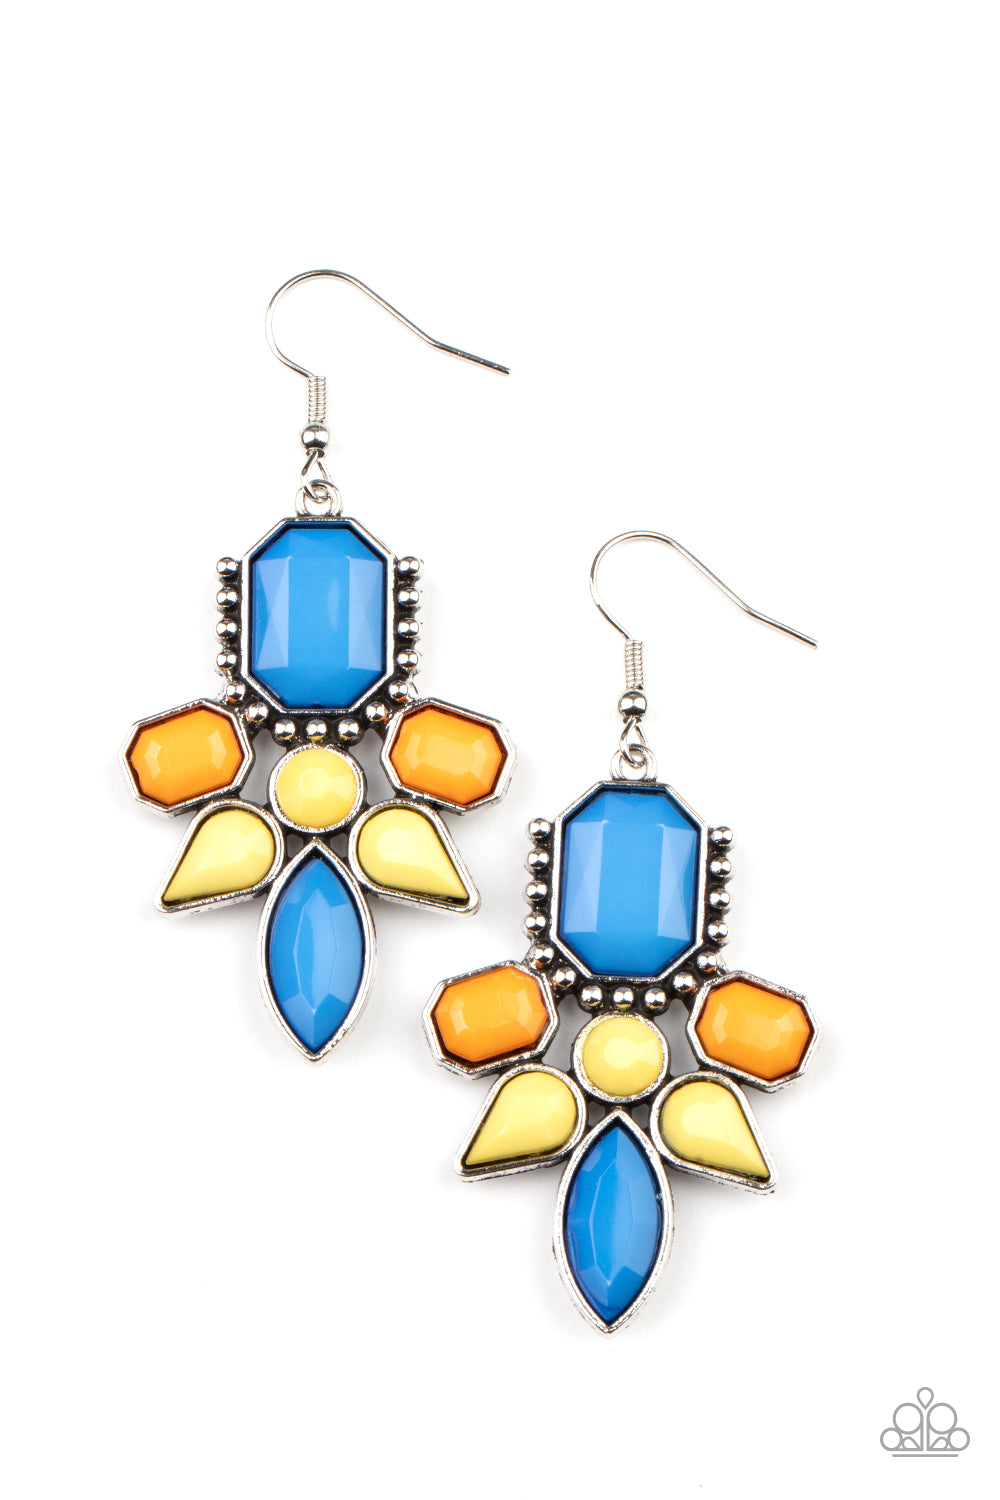 Vacay Vixen - Blue, Yellow and Orange Earrings - Paparazzi Accessories